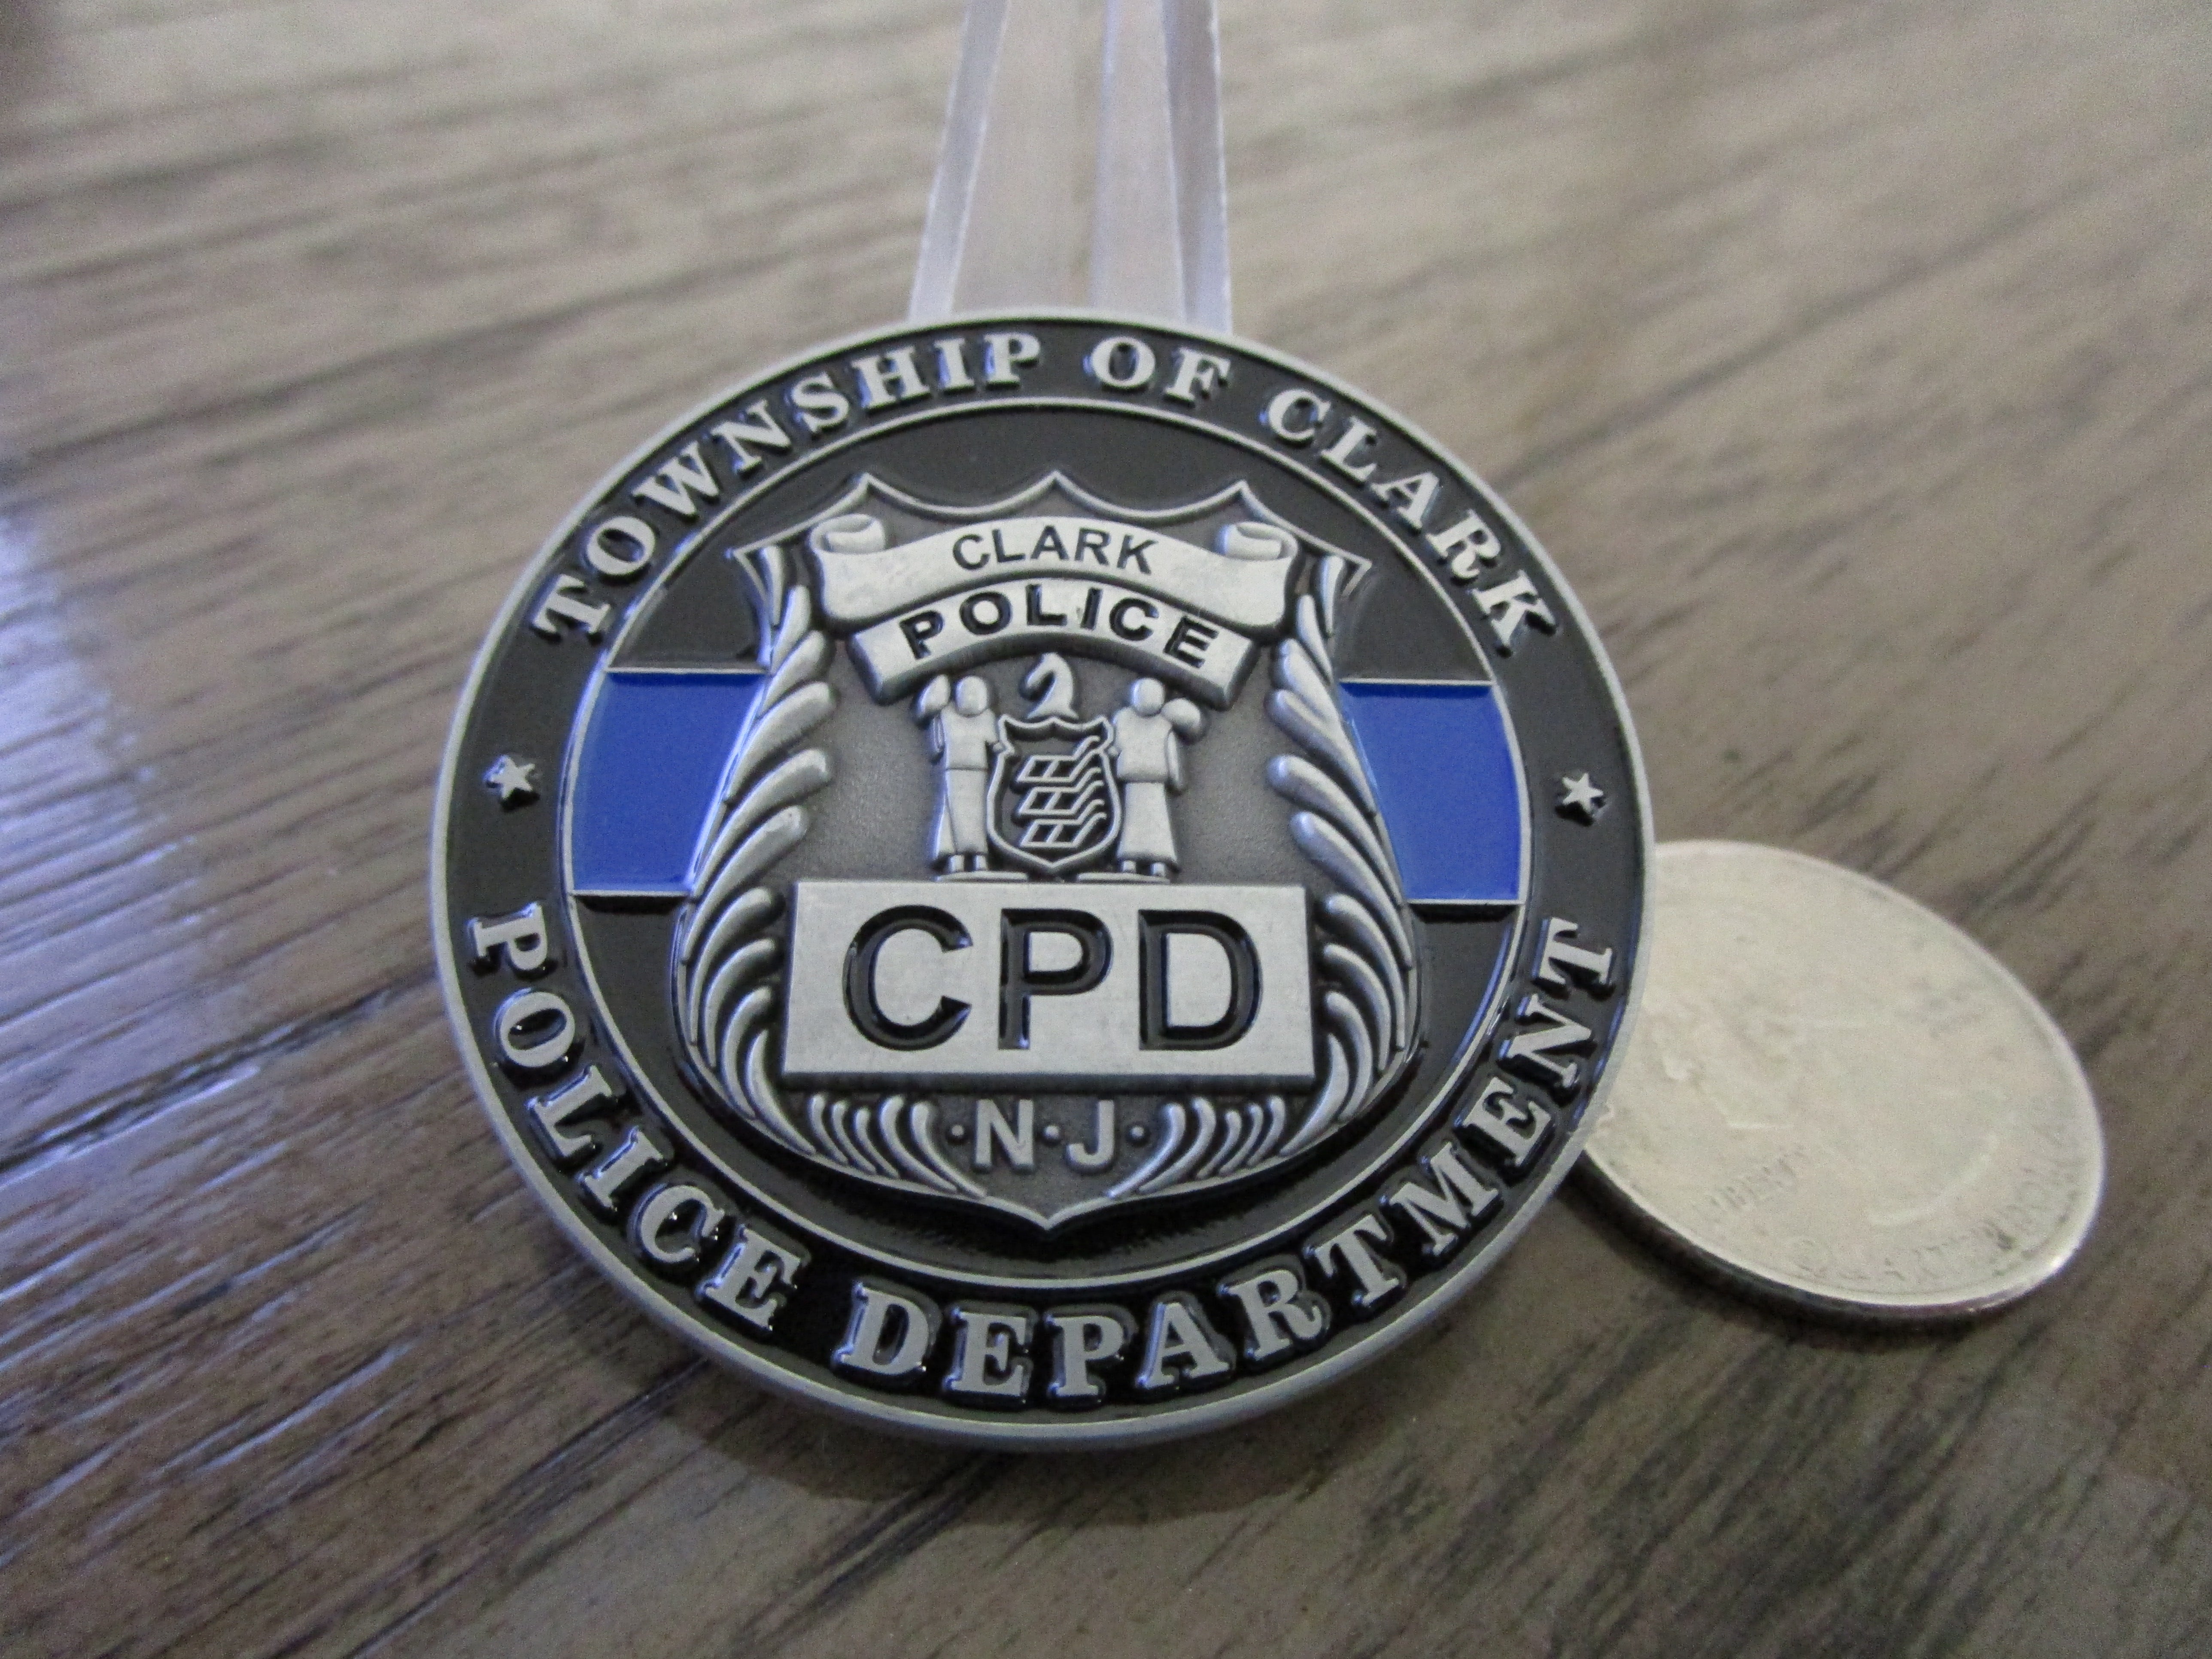 Township of Clark Police Department New Jersey CPD Challenge Coin